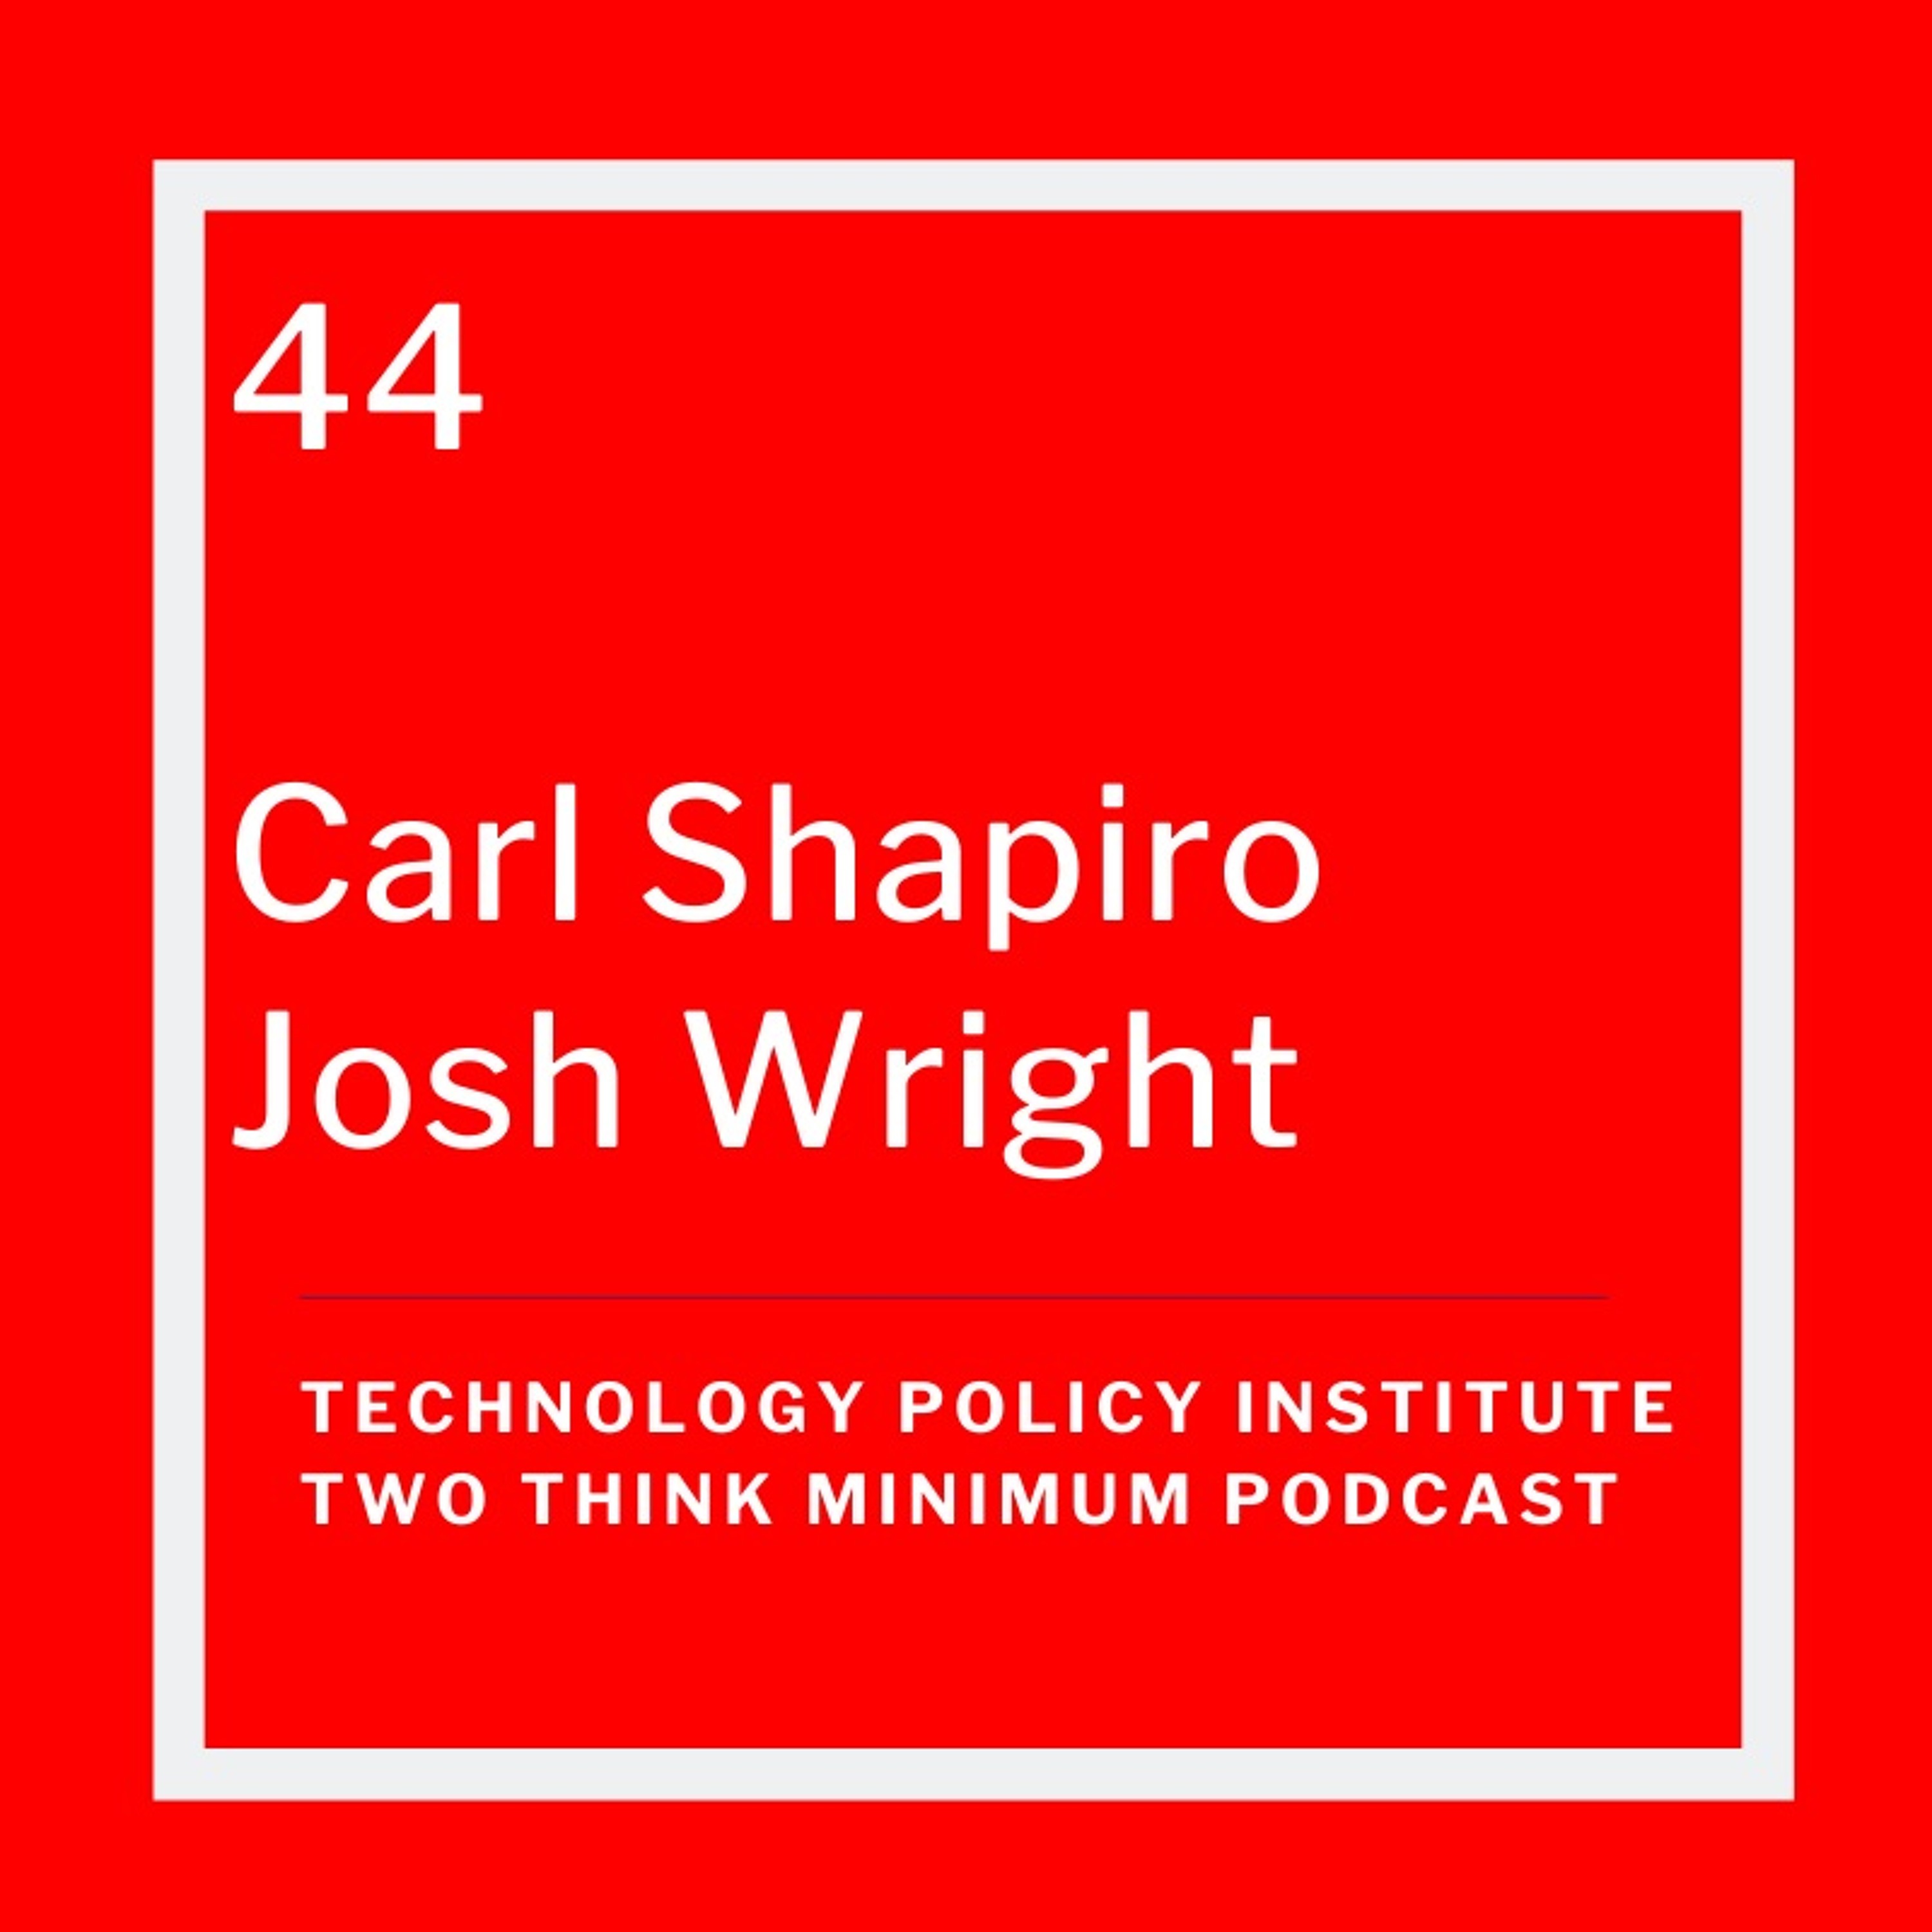 Carl Shapiro and Josh Wright Debate Antitrust and Competition Policy